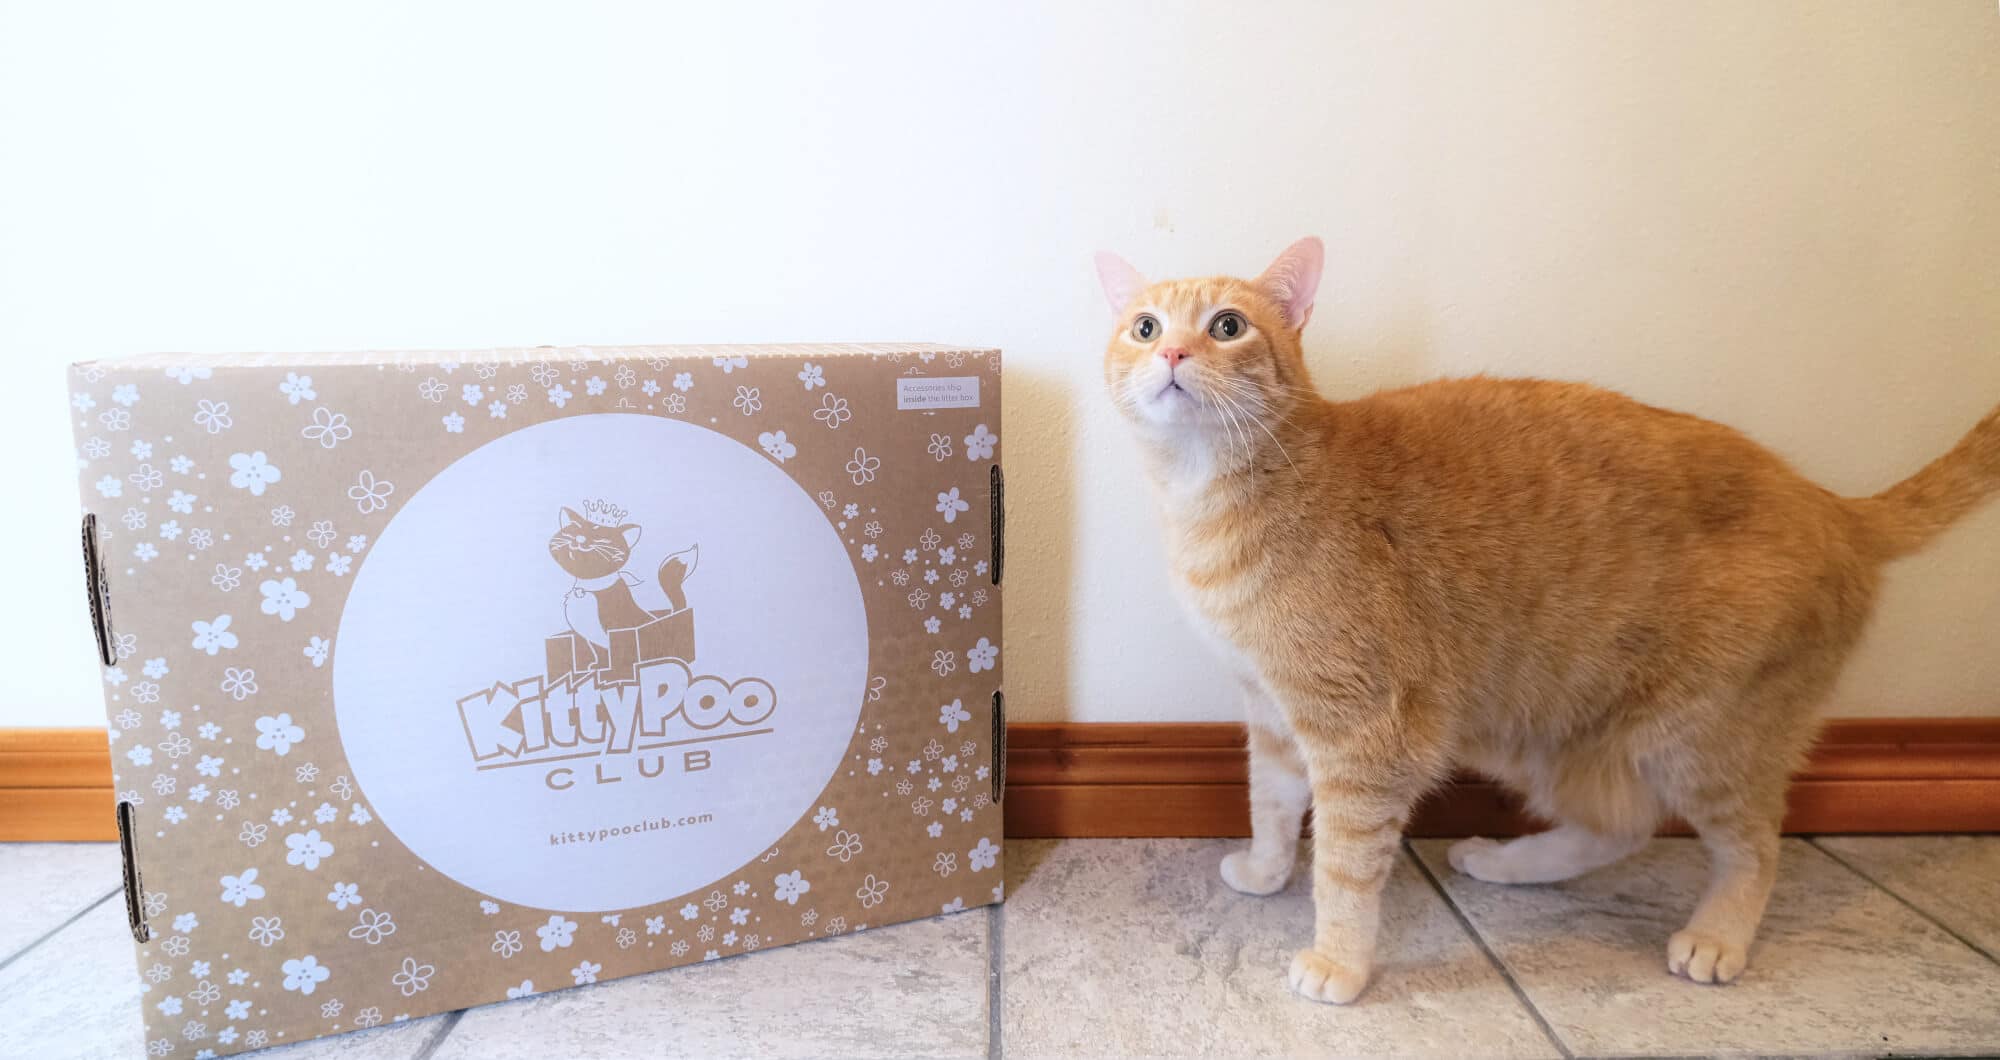 Kitty Poo Club Subscription Cat Litter Review We Tried it...Here's